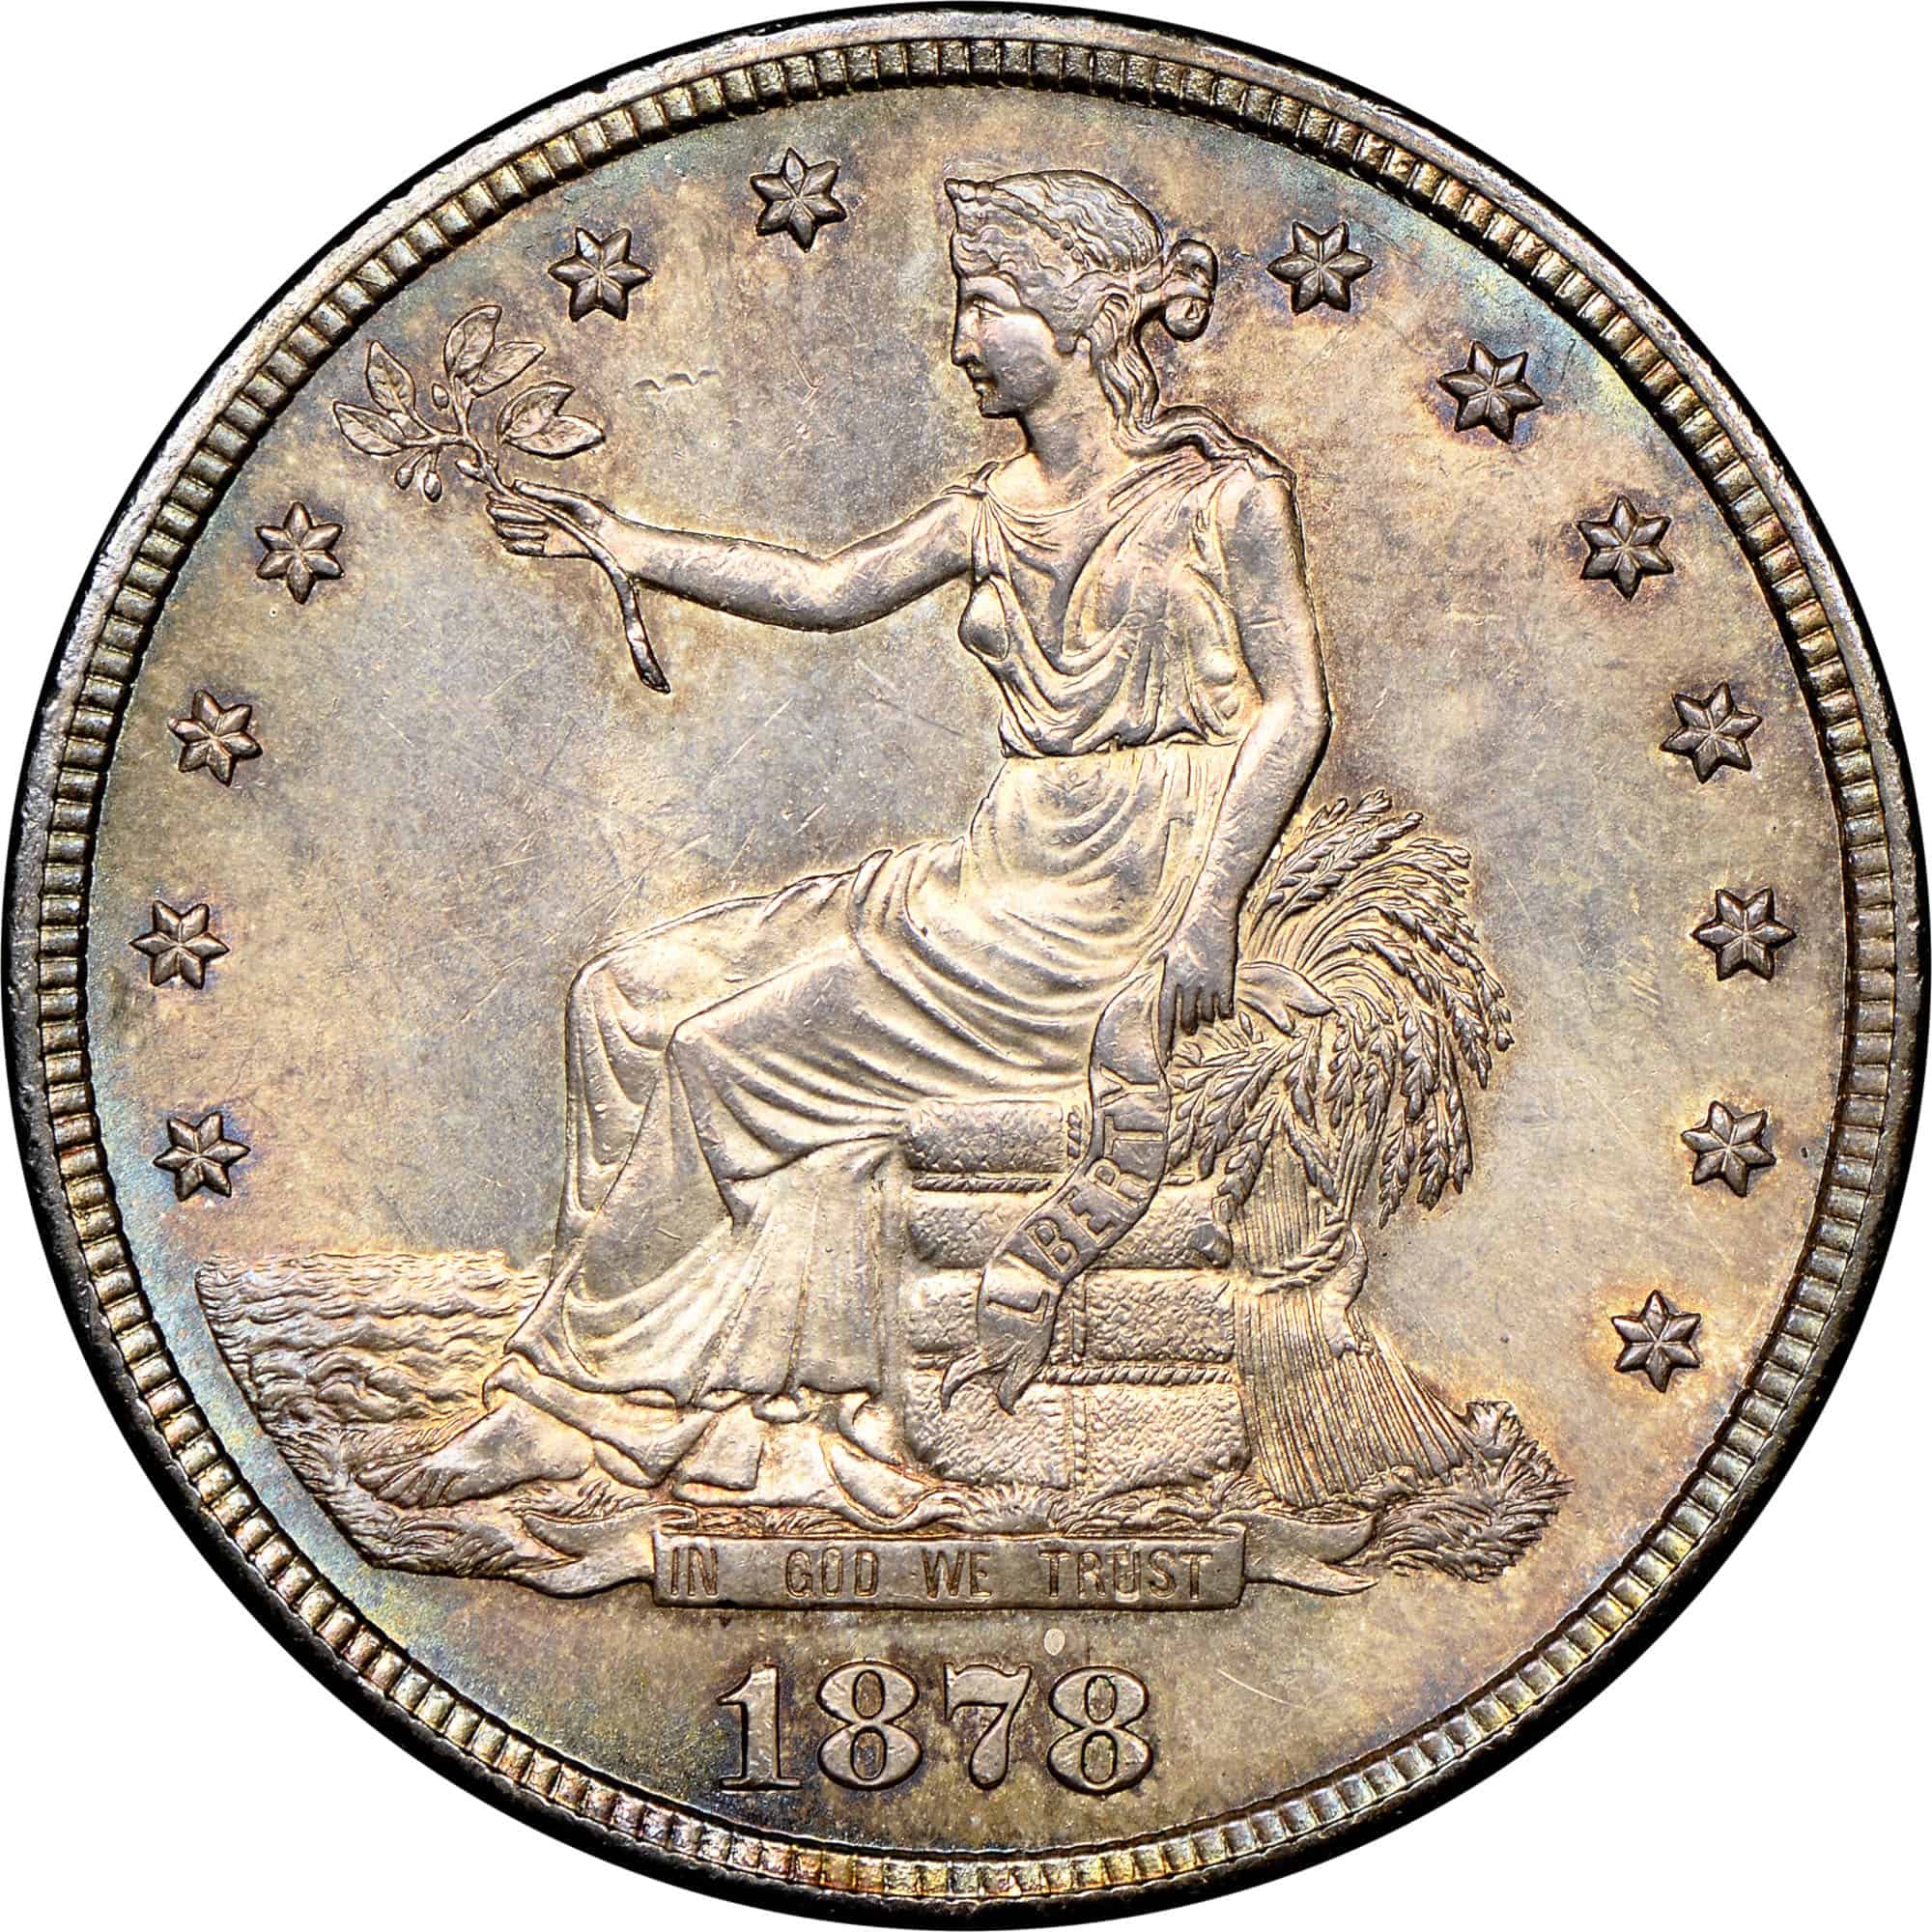 The Obverse of the 1878 Silver Trade Dollar